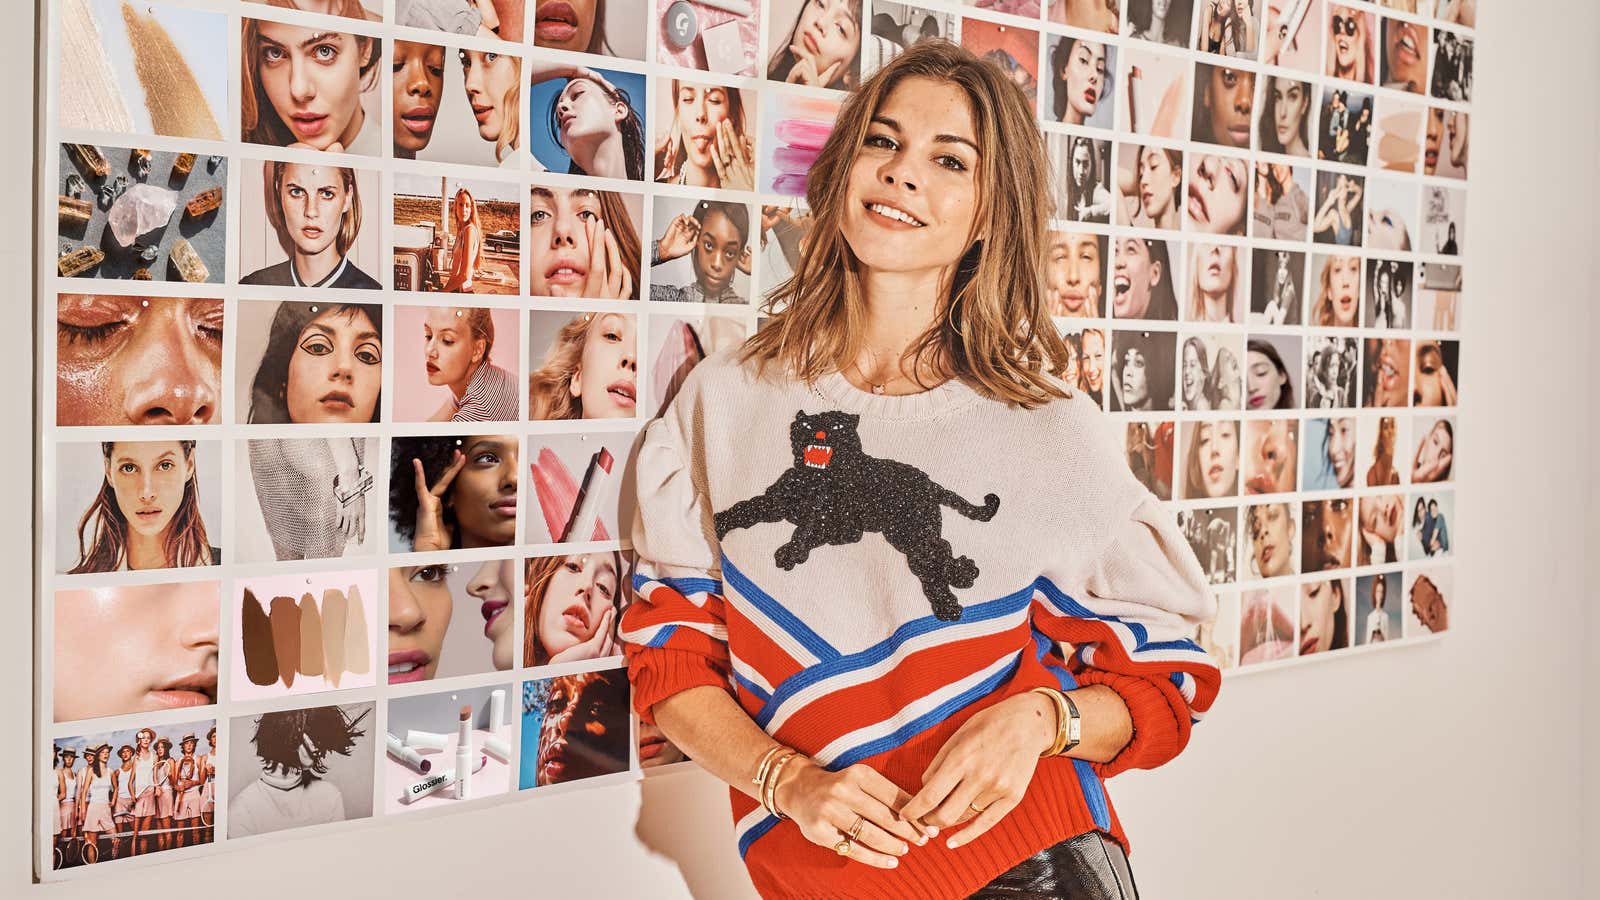 Glossier founder Emily Weiss.